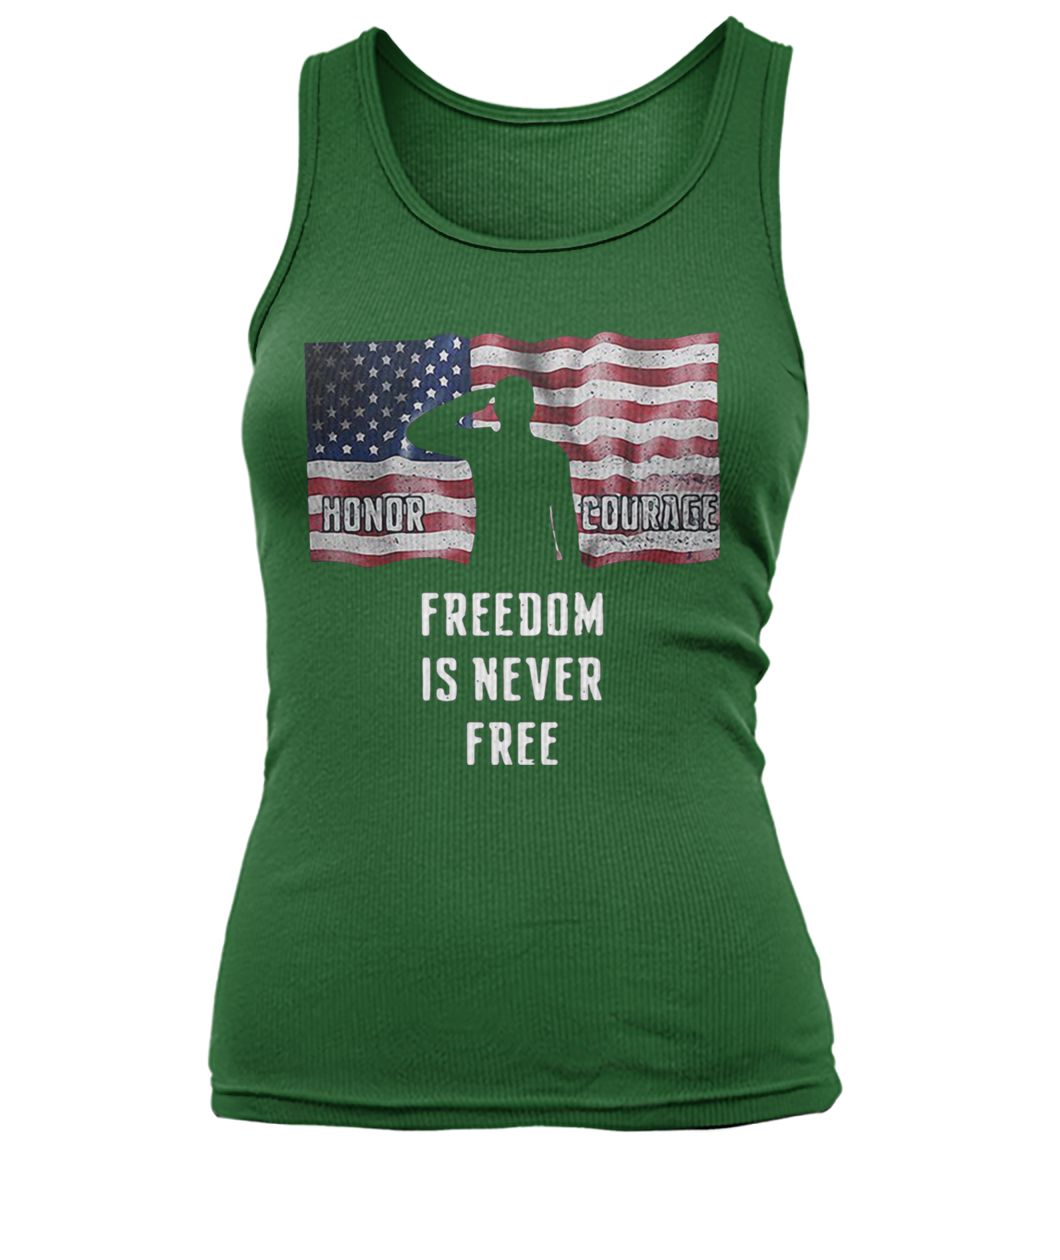 American flag honor courage freedom is never free women's tank top